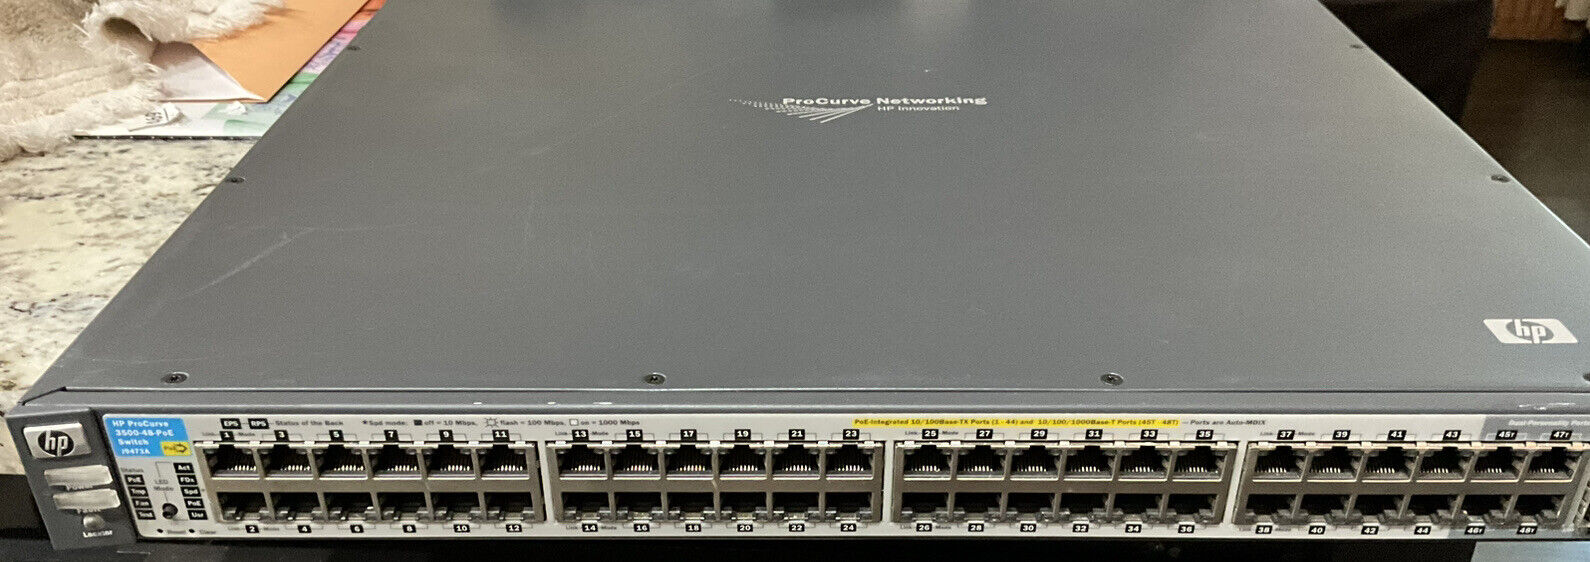 HP J9473A 3500-48-PoE Switch Great Shape : Straight From Working Environment